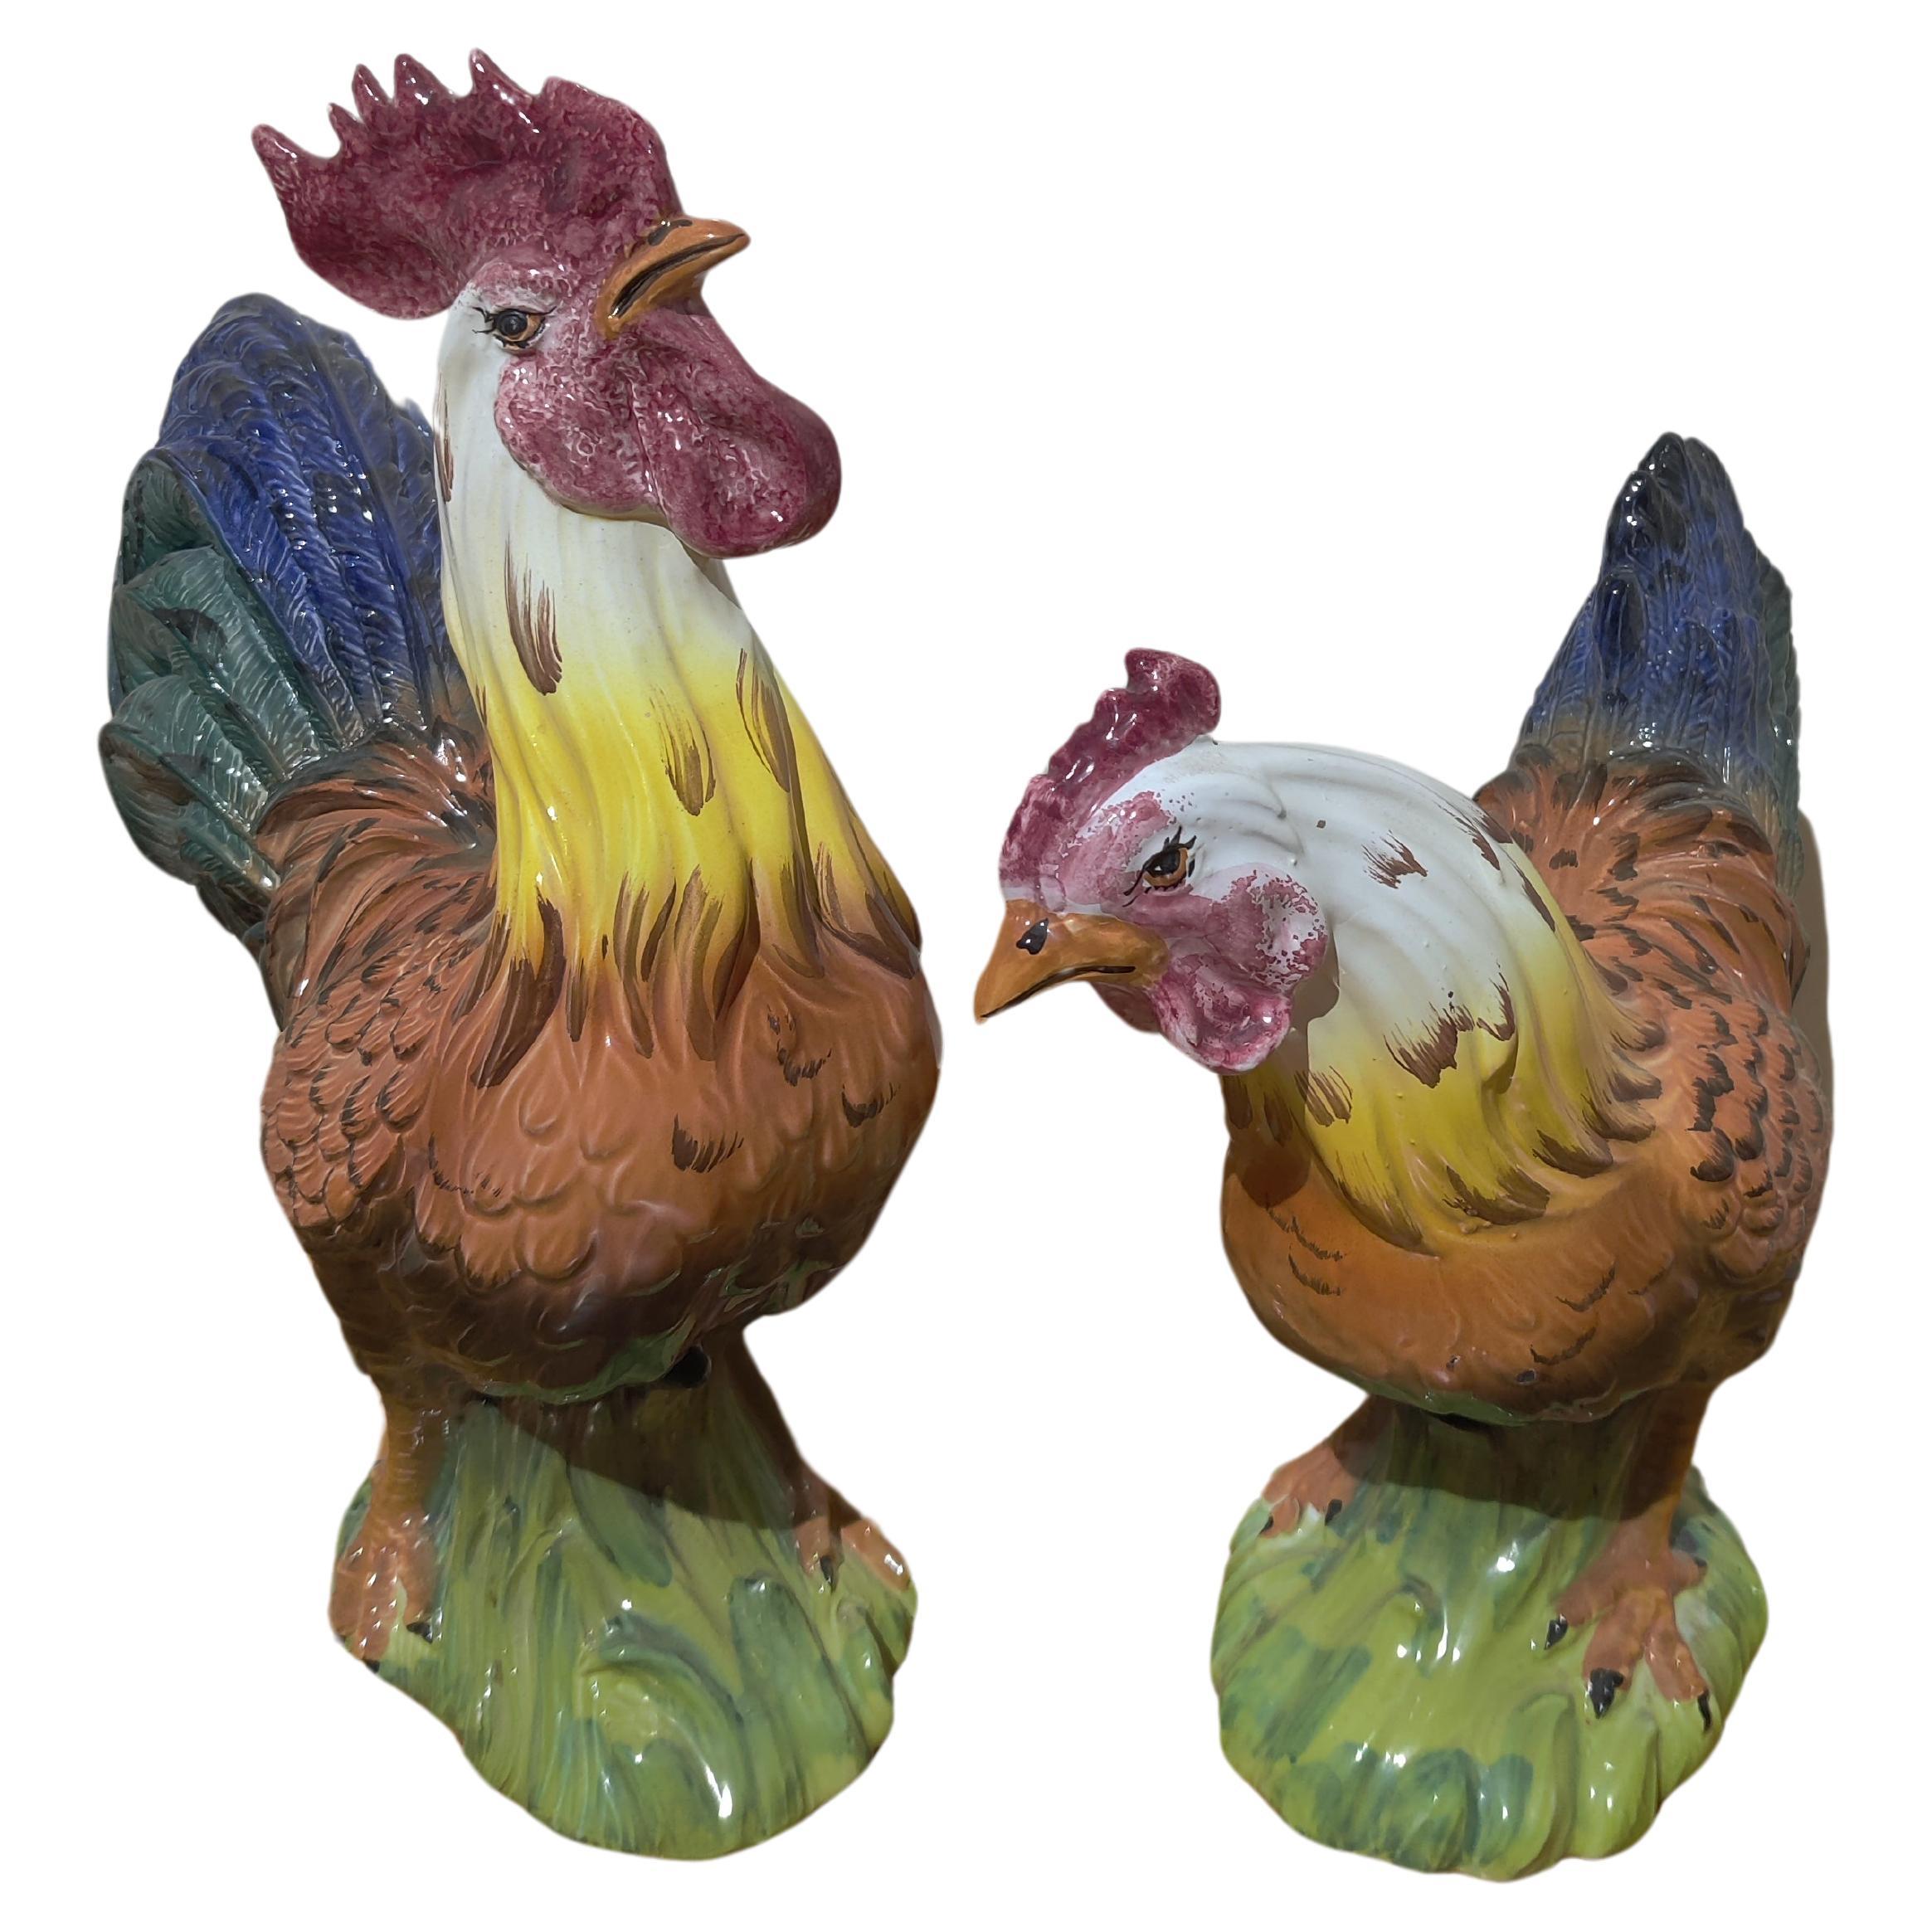 Ceramic Intrada Rooster and Hen made in Italy